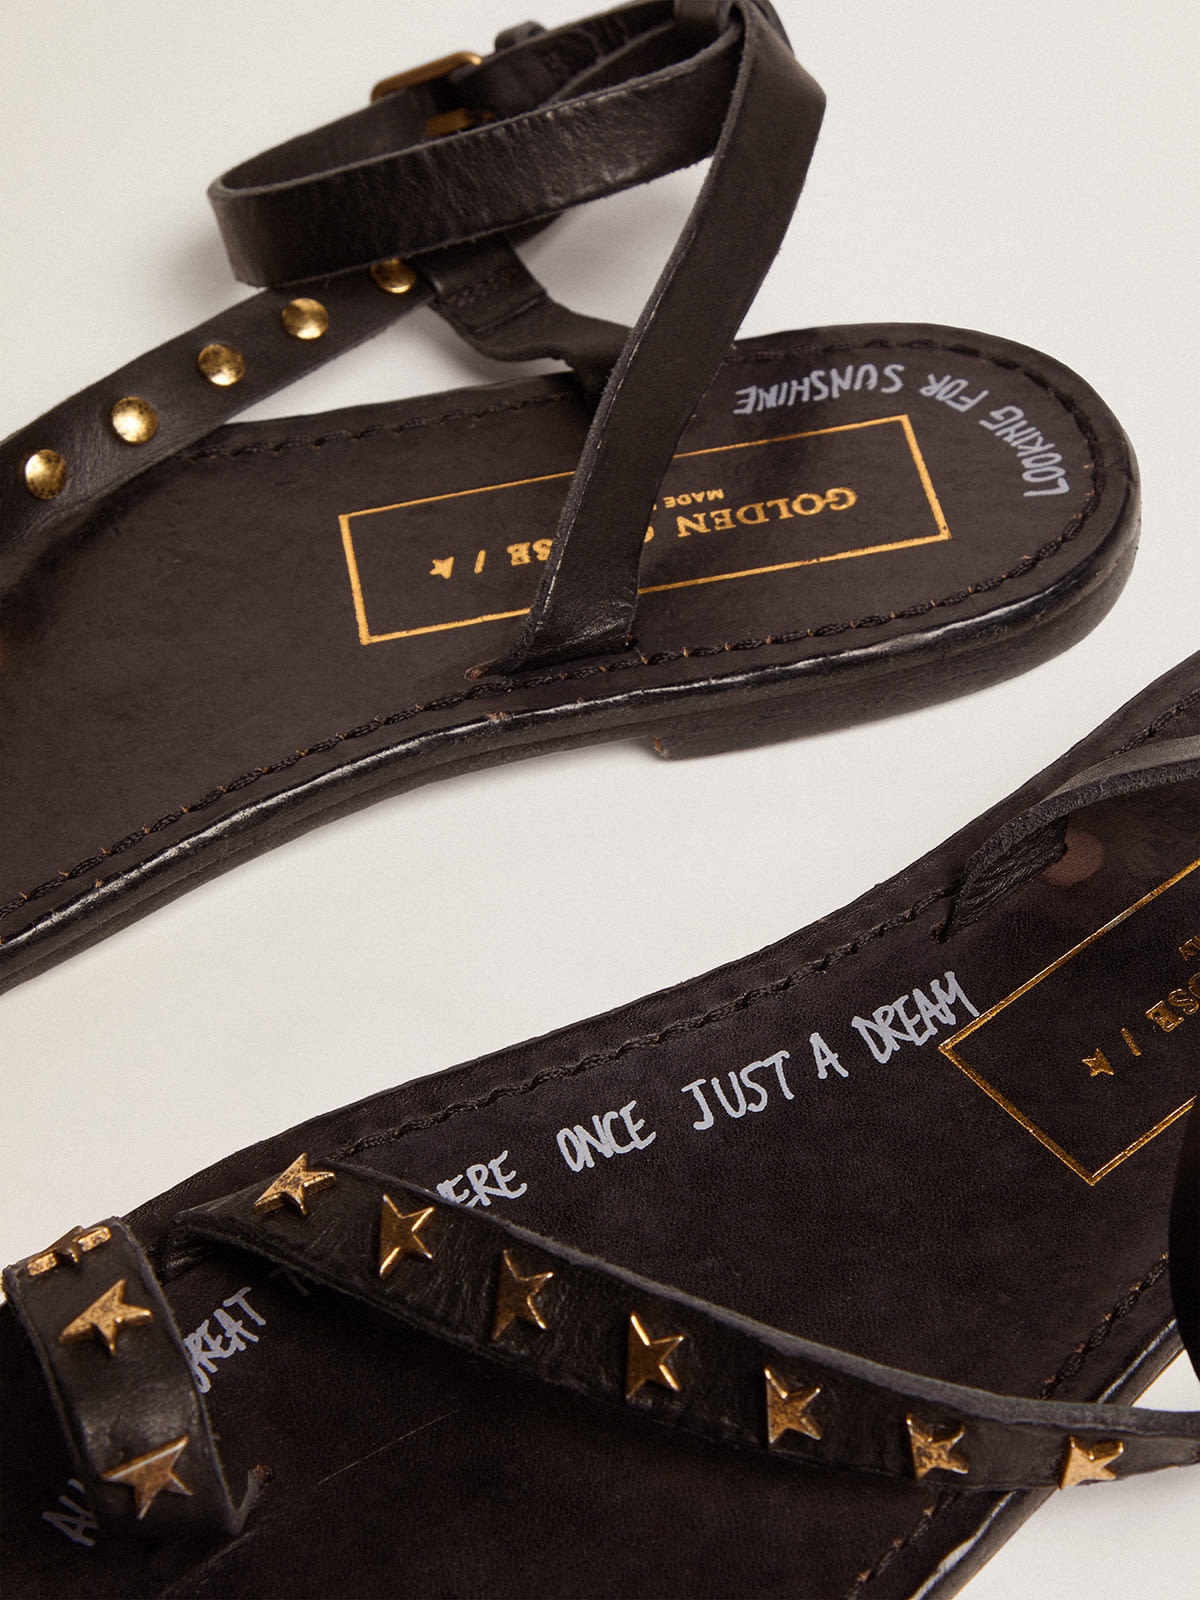 Women's flat sandals in black leather with gold stars - 4